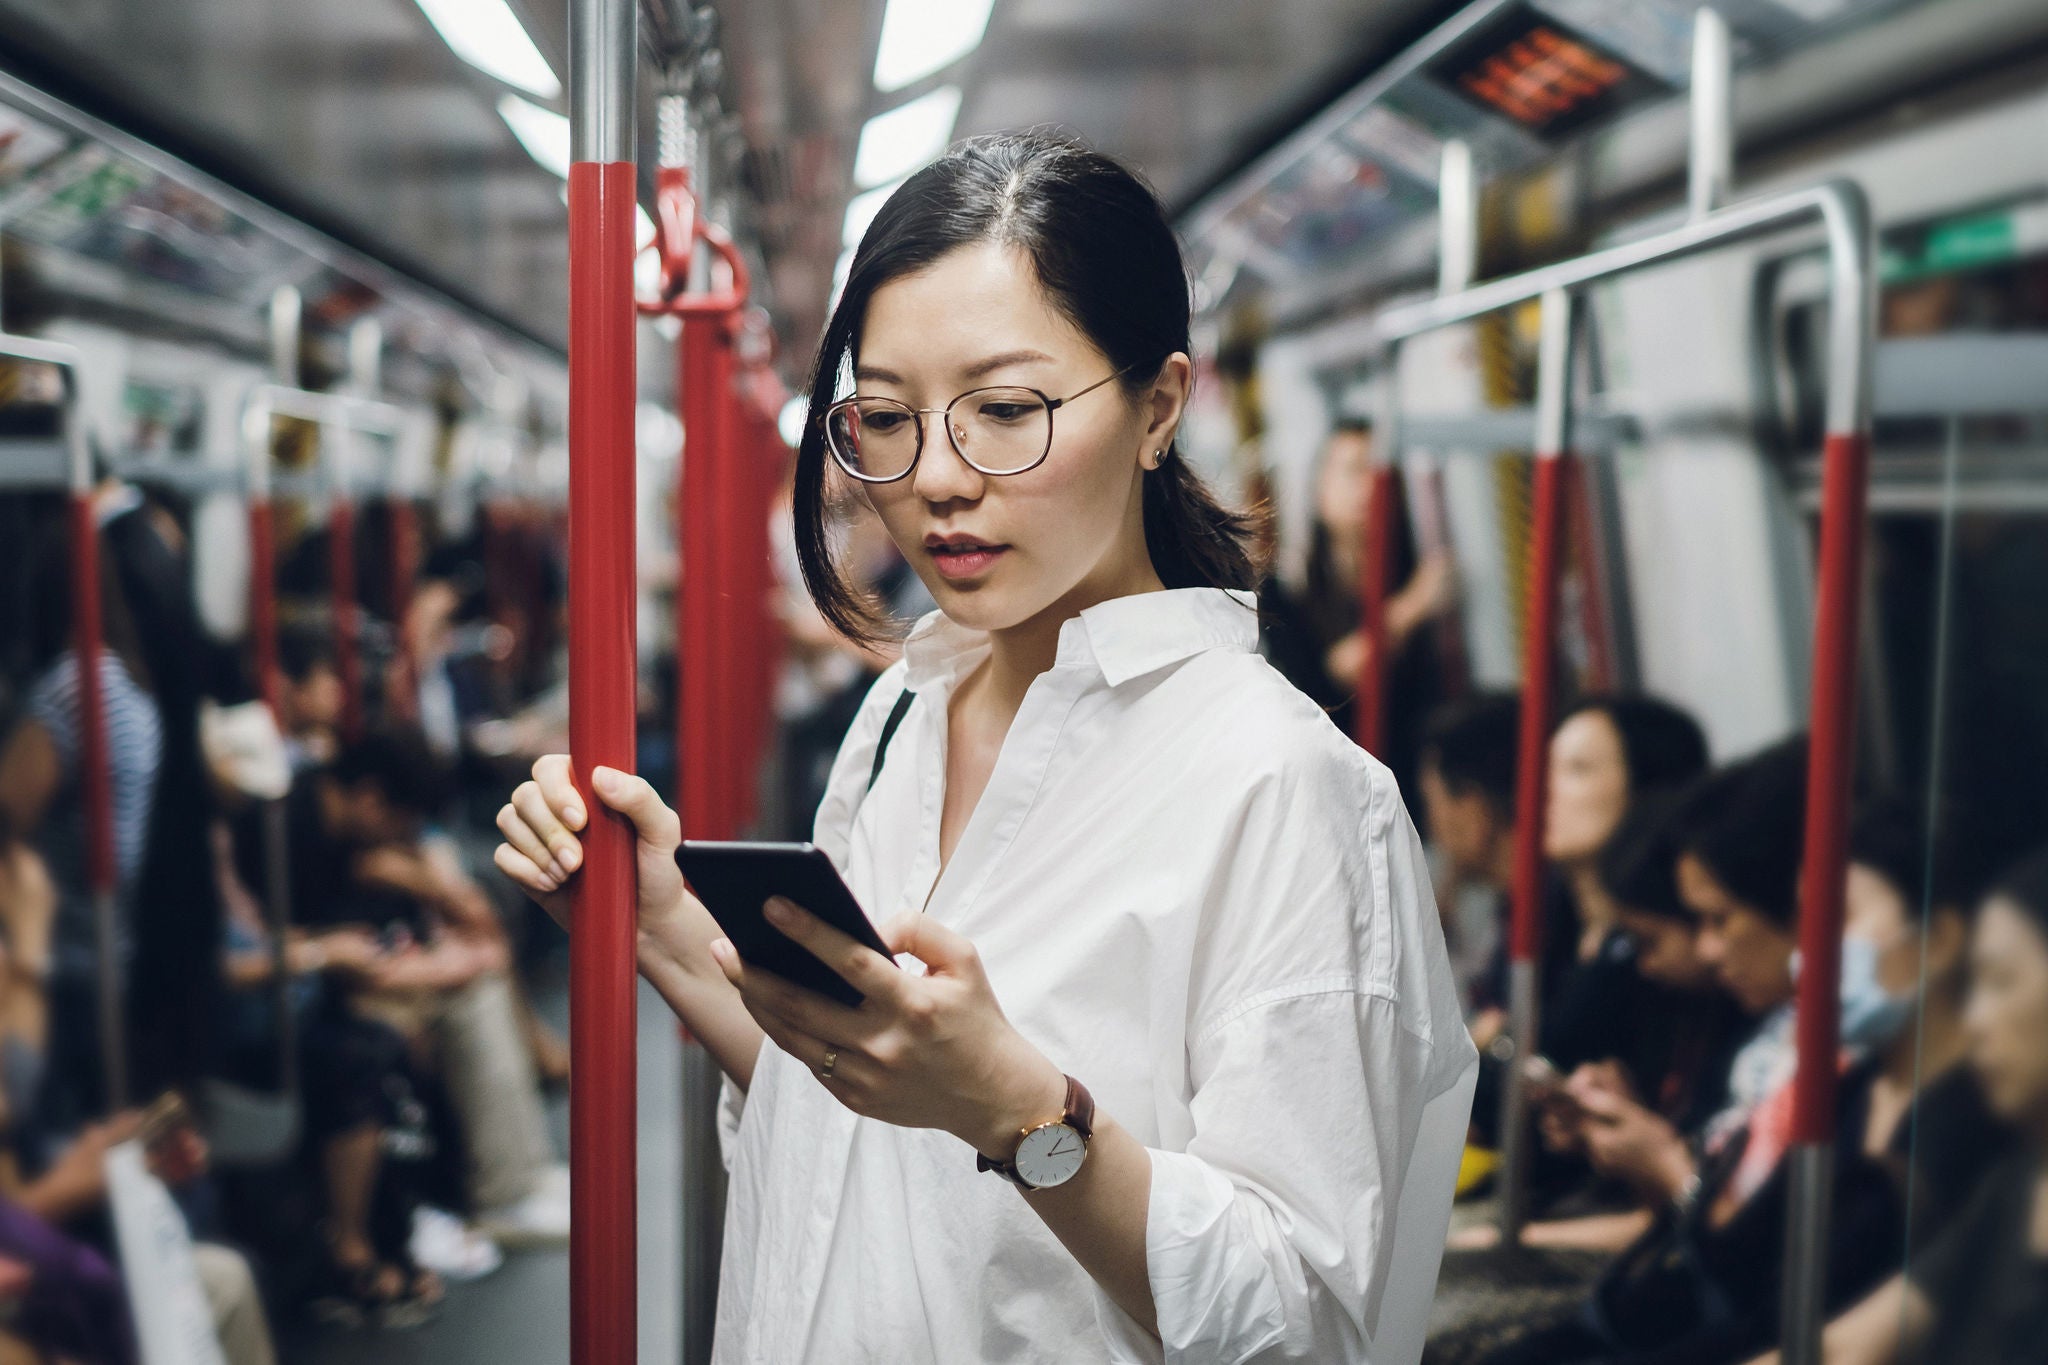 Asian woman in glasses checks phone on commute